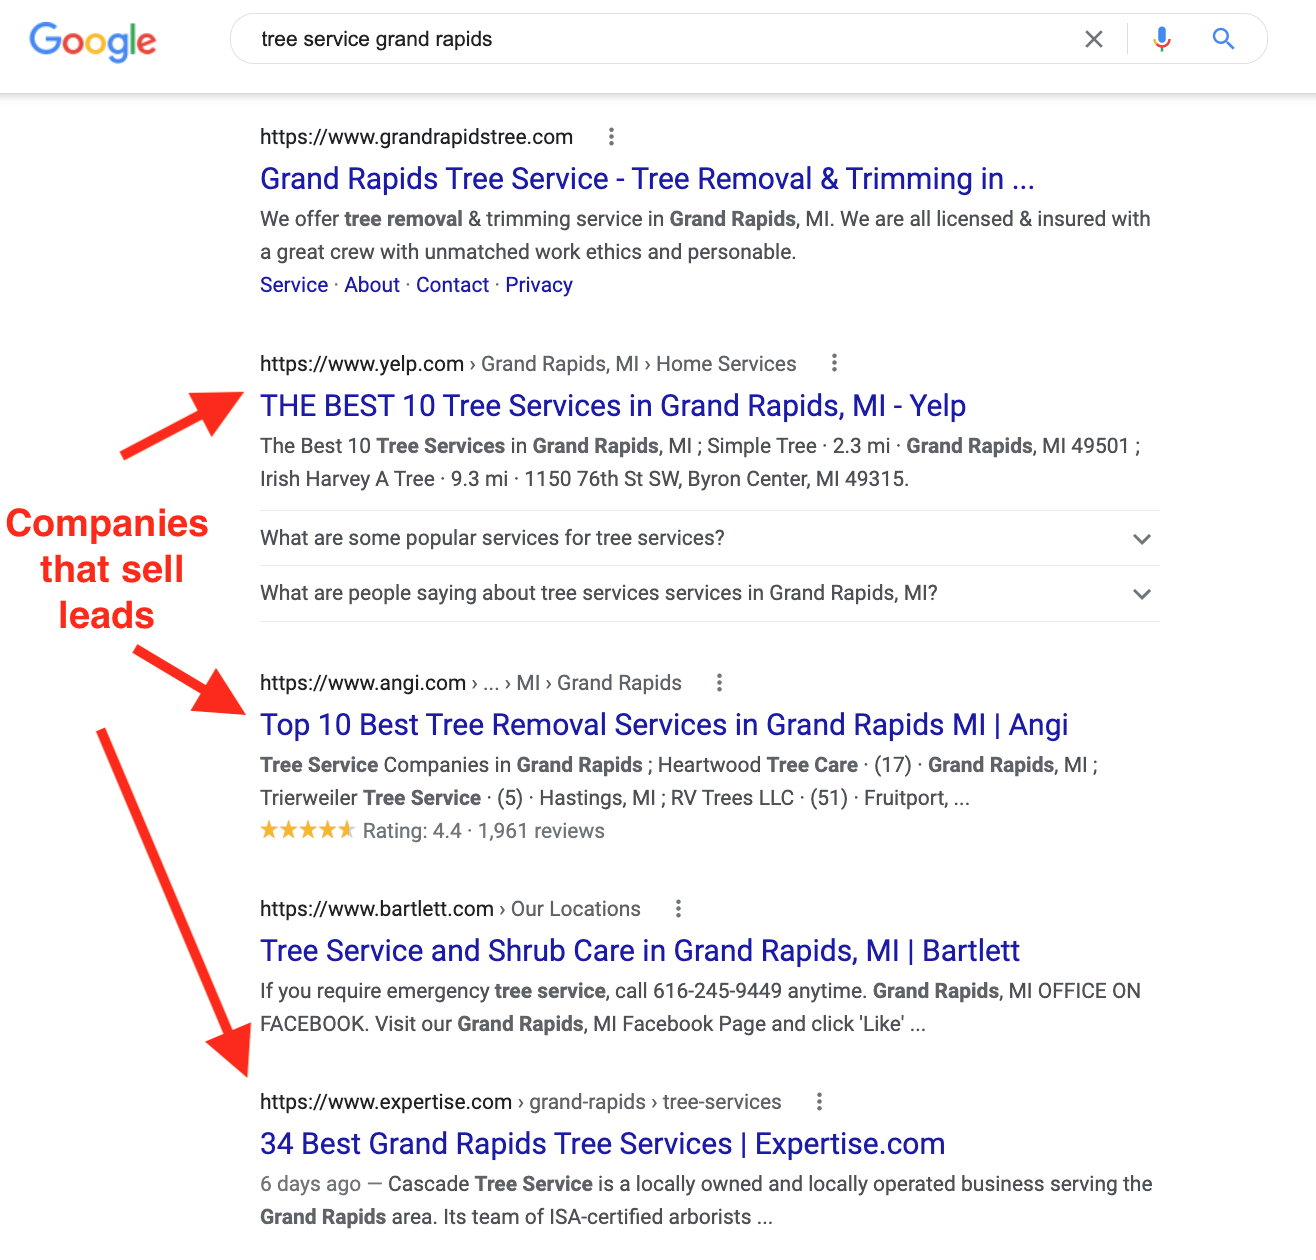 yelp angi and expertise showing up in the google search results below grand rapids tree service